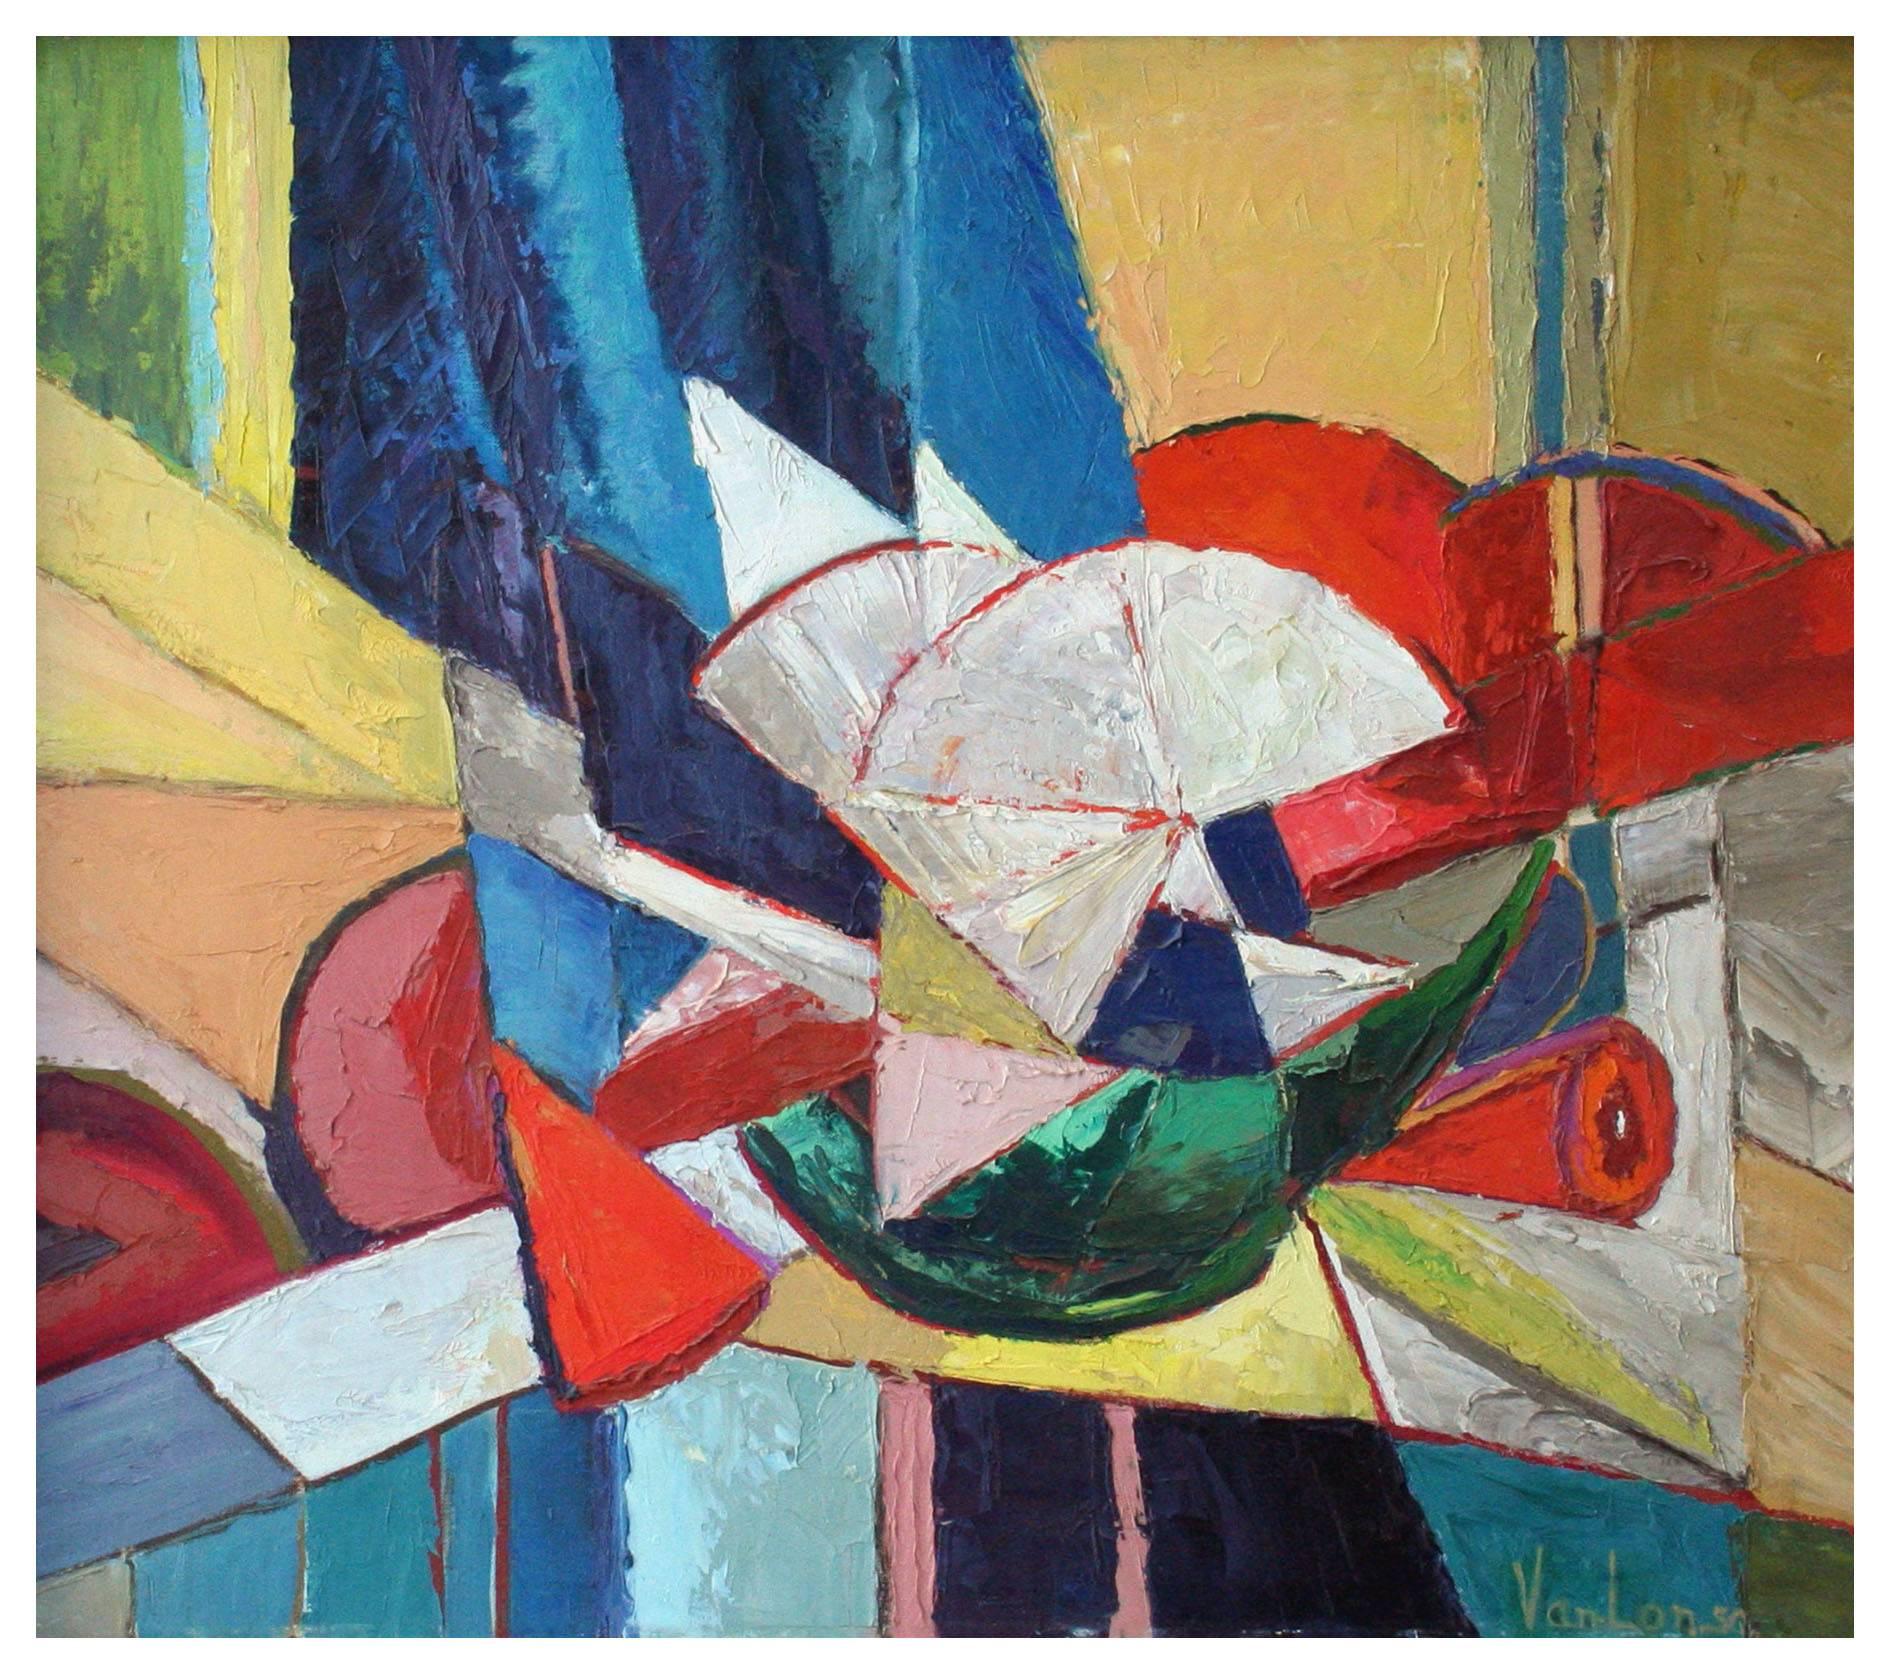 Colorful San Francisco School Abstract Synchromy Movement painting by Virginia Lonergan (American, born c. 1898). Born in Minnesota, she married Arthur Lonergan and the 1940 U. S. Census listed her as living in Oakland, California at age 42.  At one